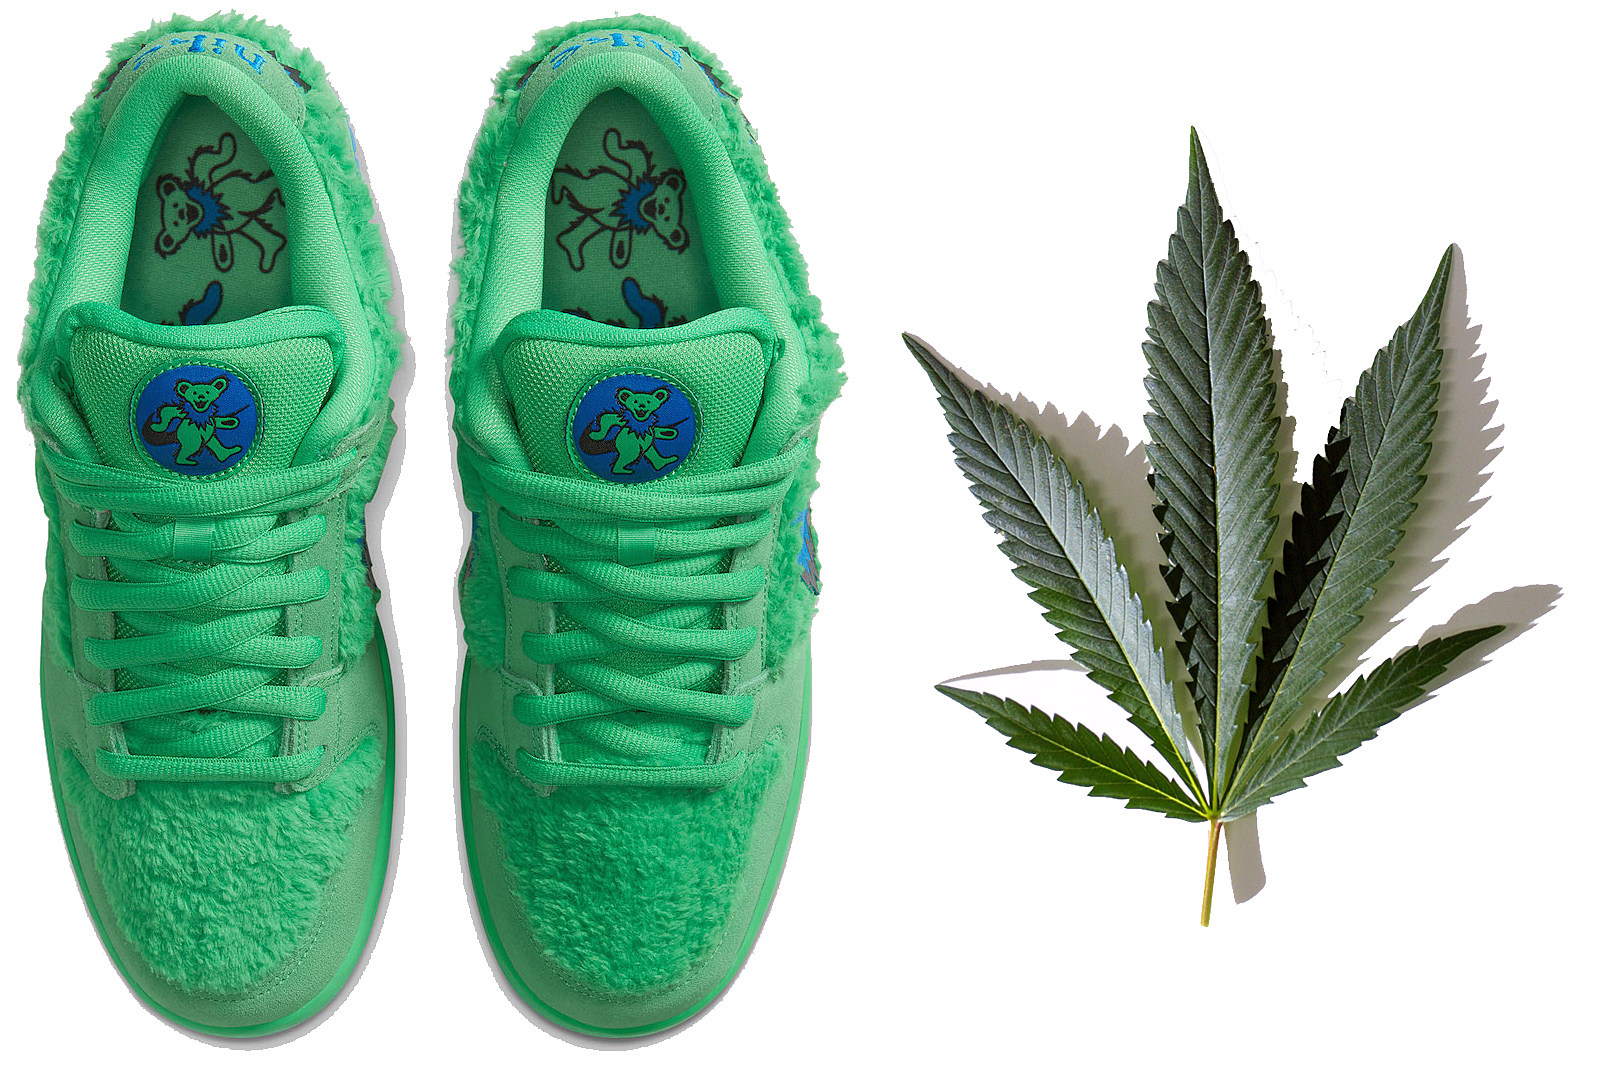 Nike's New Grateful Dead Sneakers Have a Hidden Pouch (For Weed?)